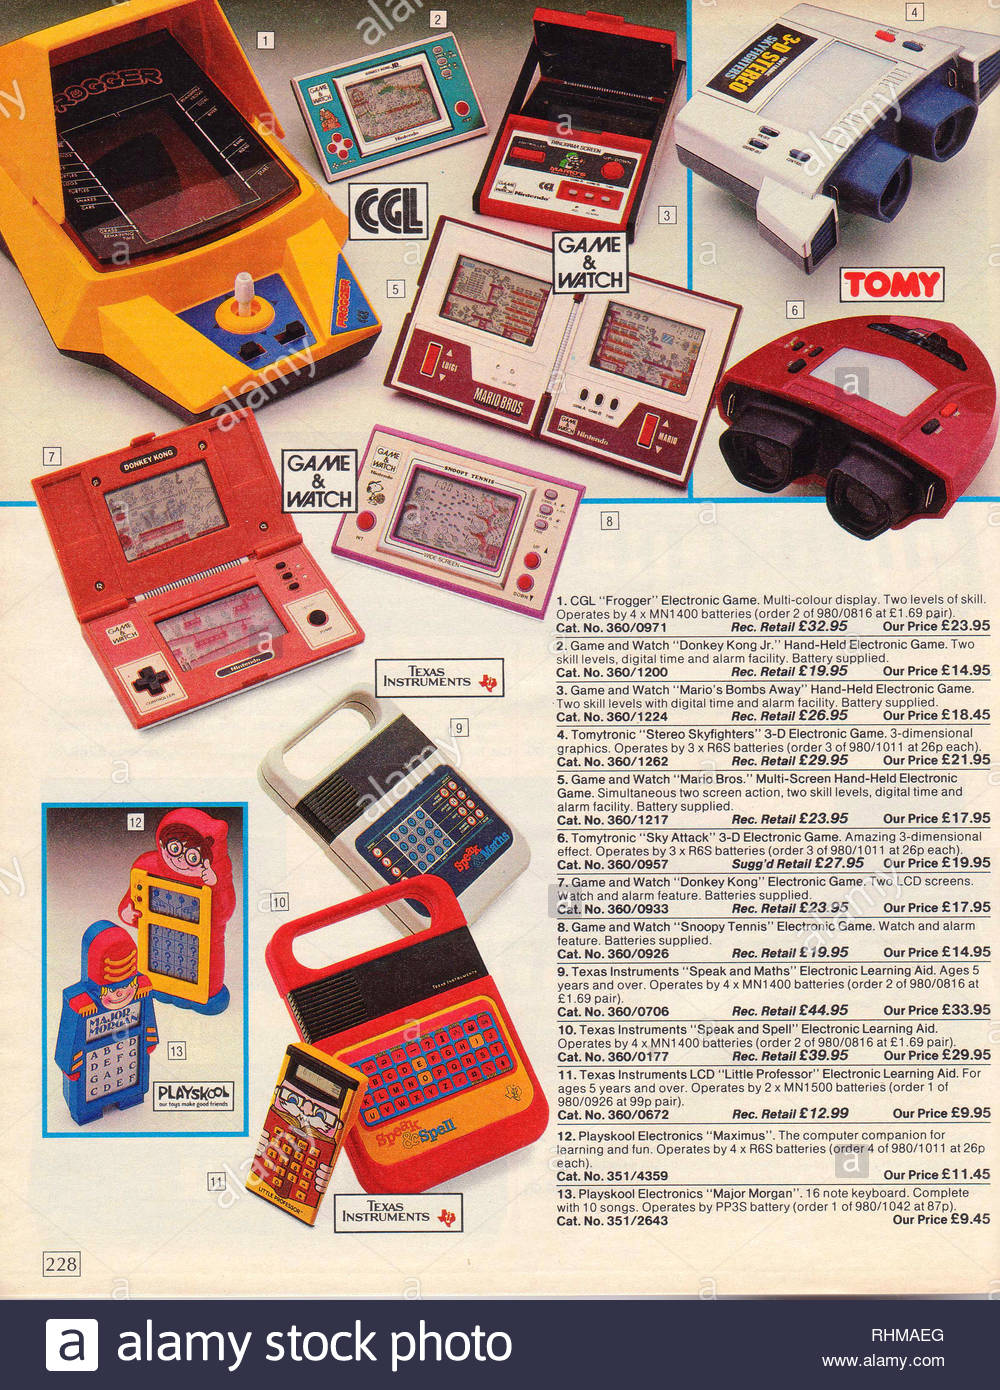 Electronic Game console, Argos Catalogue items from 1985 Stock Photo